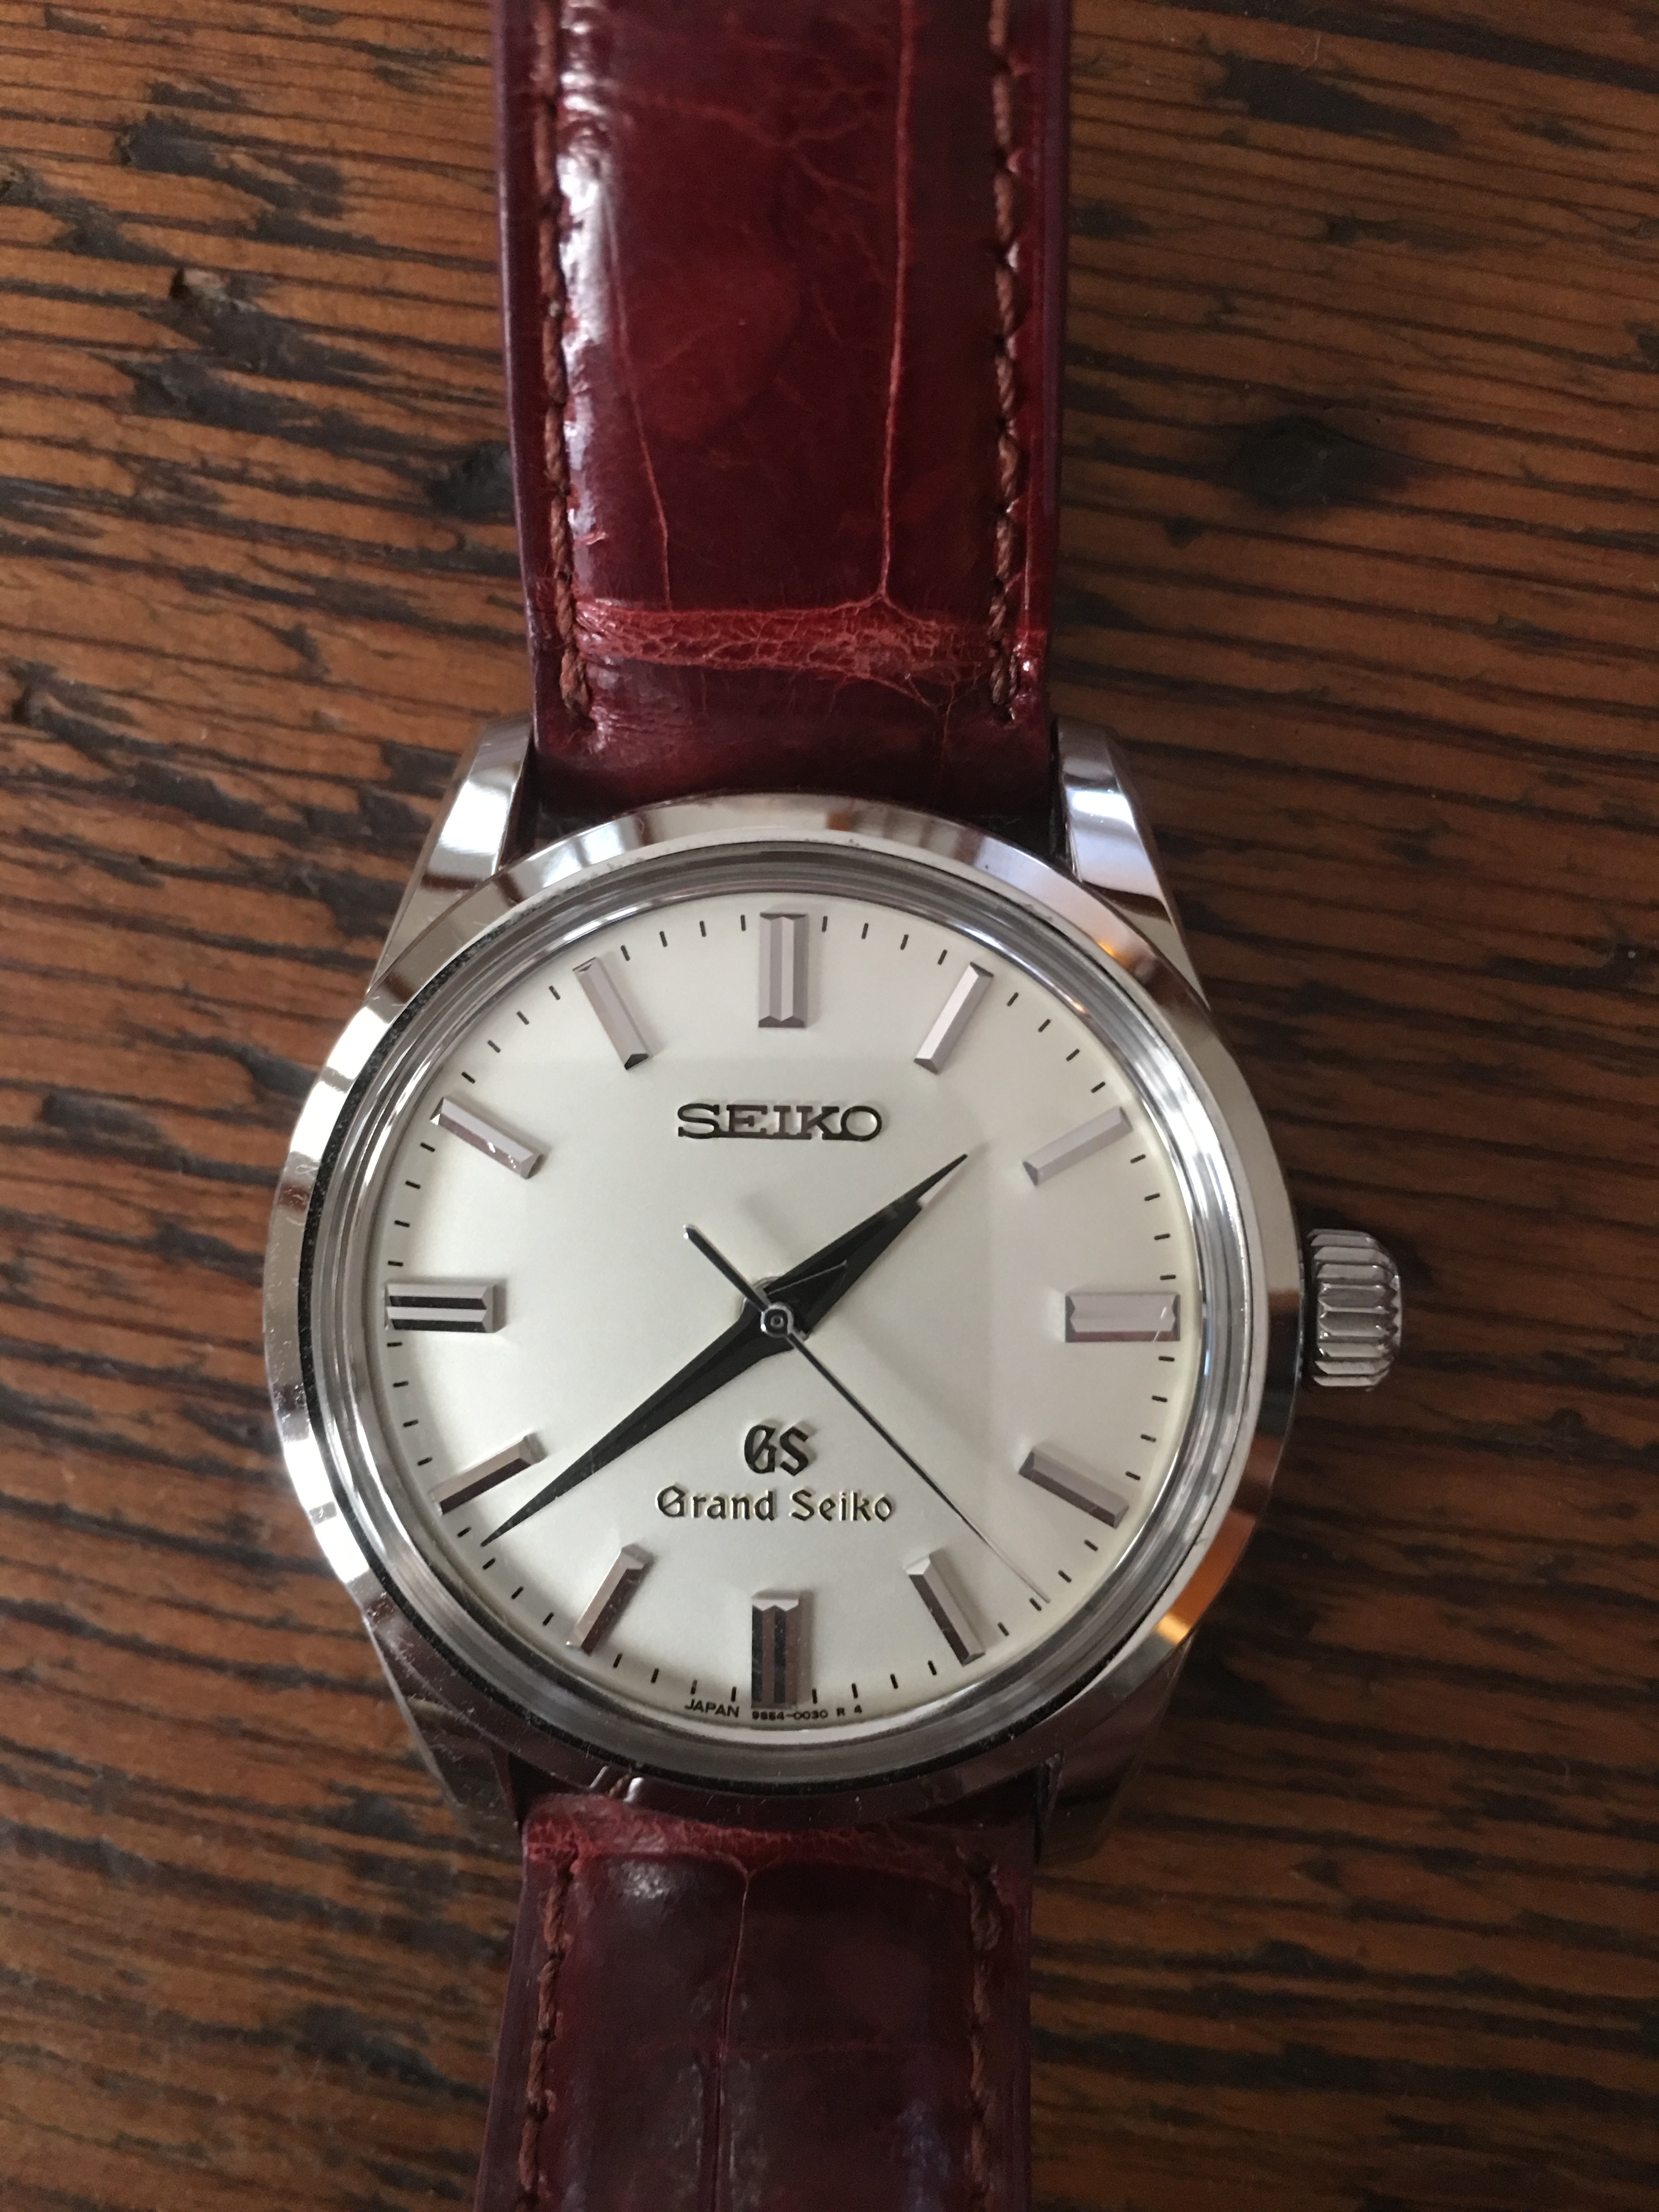 SOLD - Reduced Grand Seiko SBGW001 Manual Wind | Omega Forums